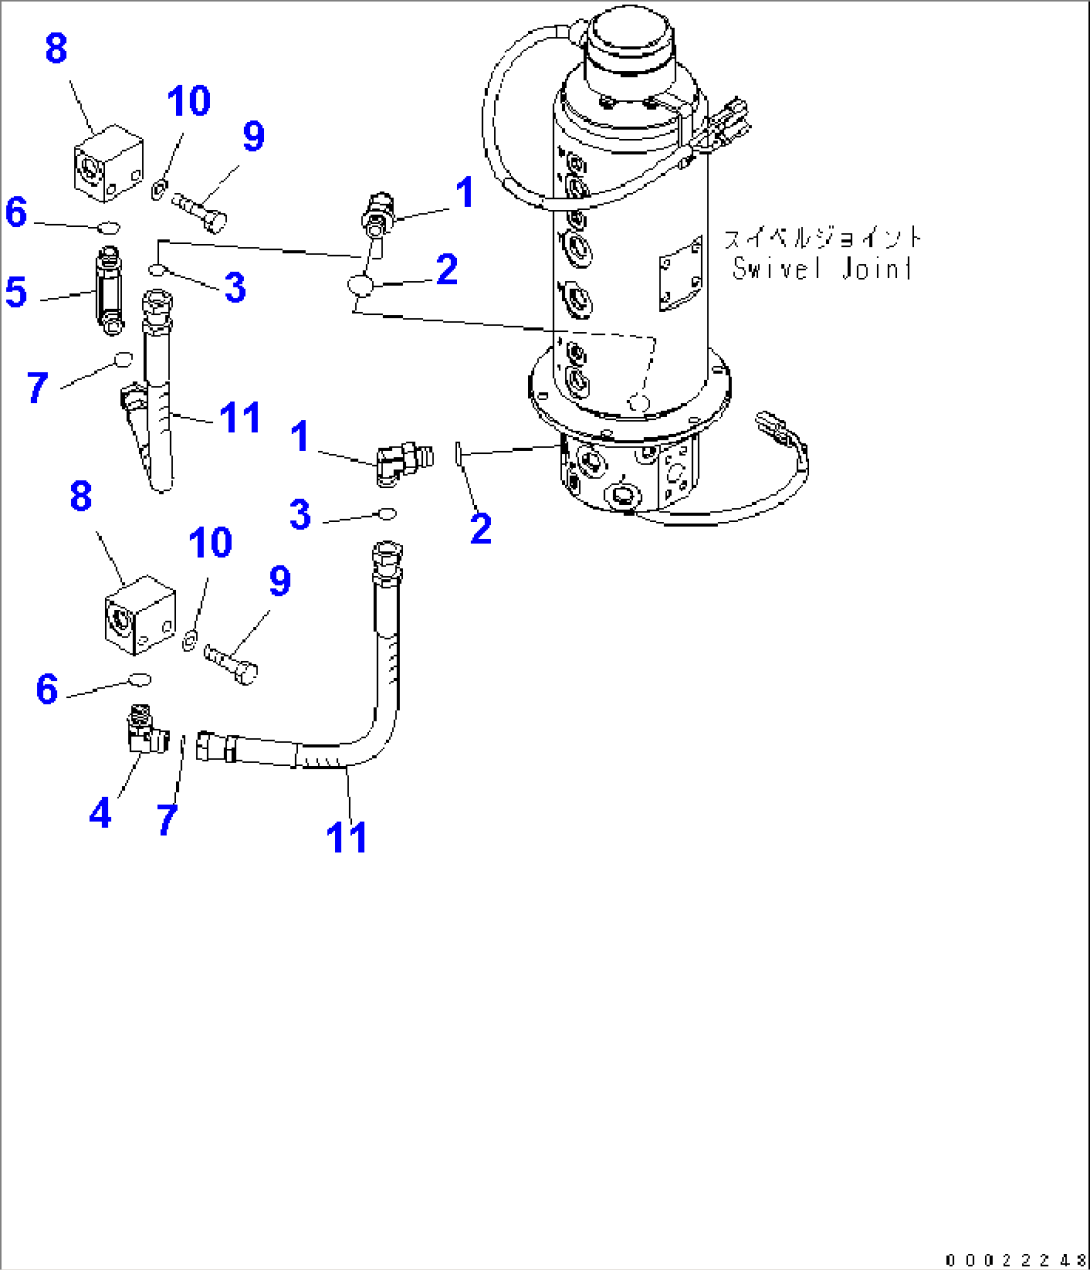 UNDER ATTACHMENT PIPING (SWIVEL JOINT ATTACHING PARTS)